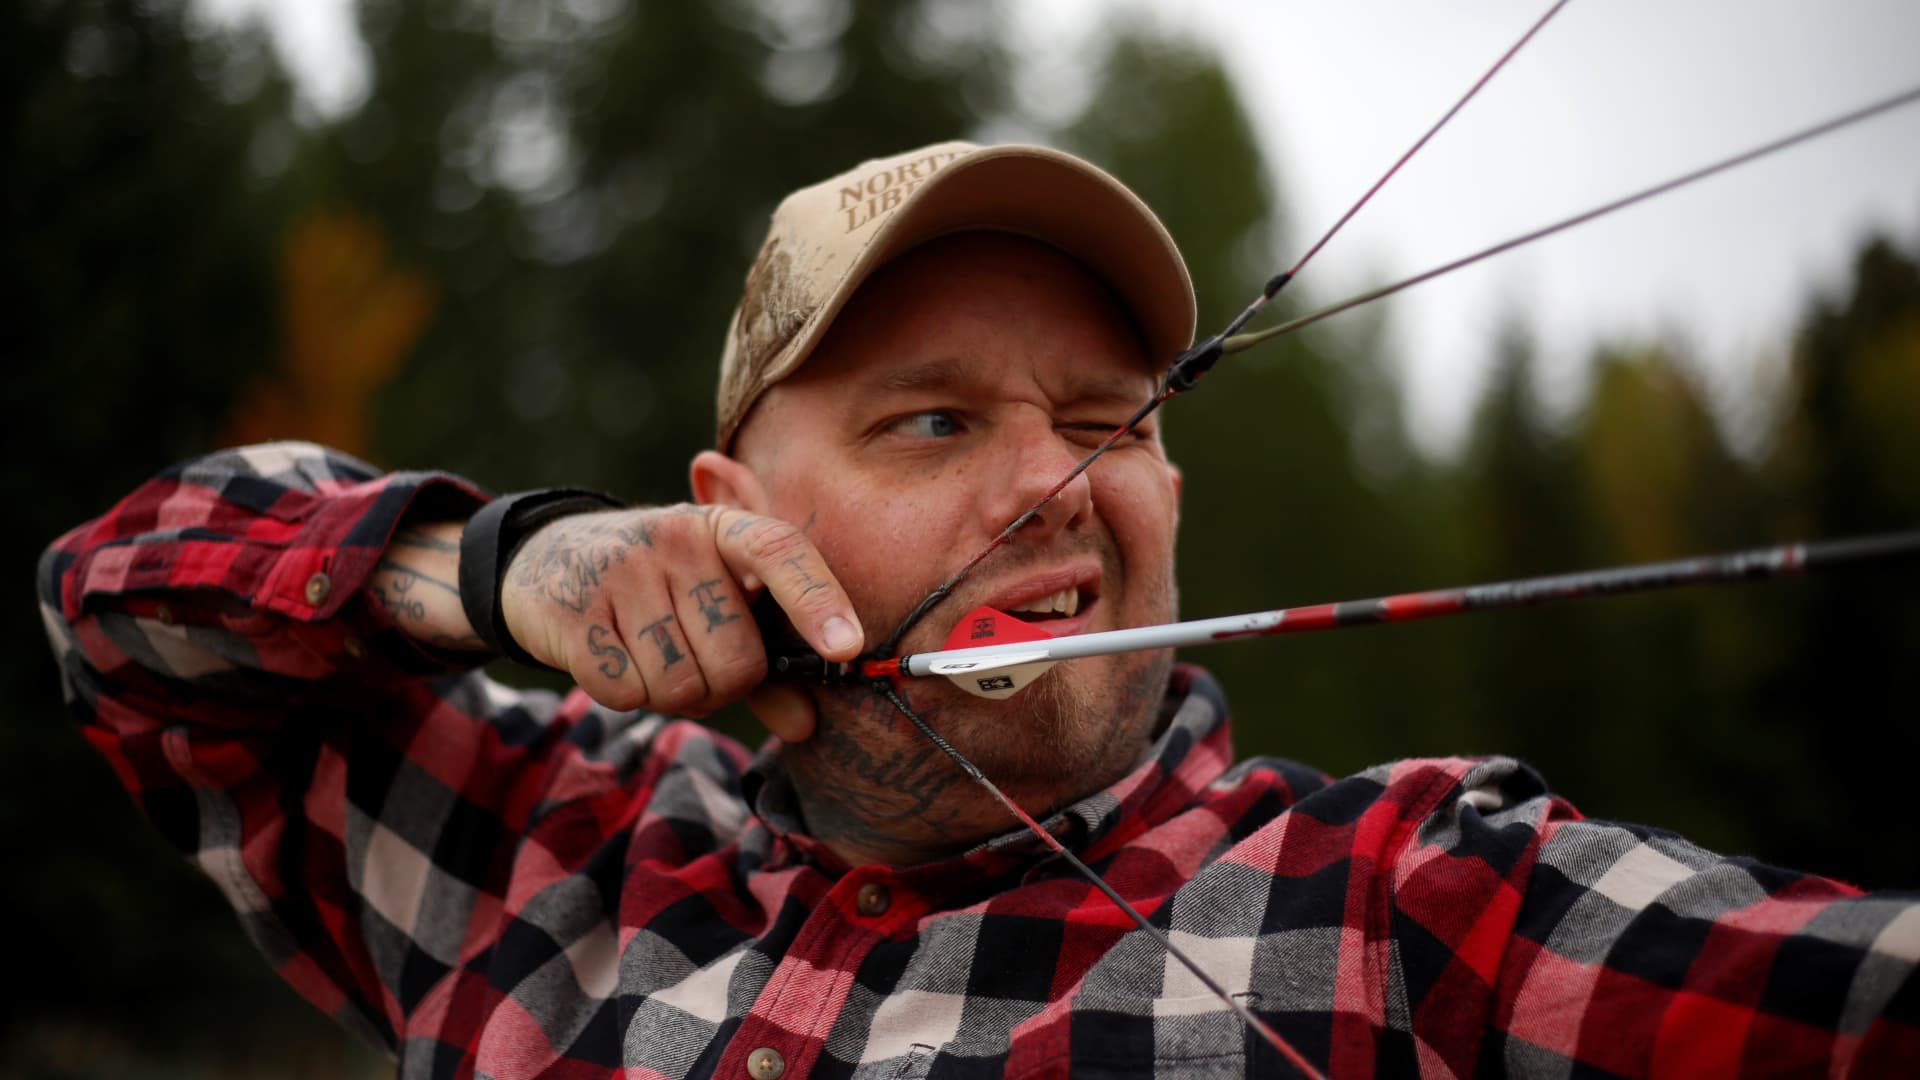 Jason Van Tatenhove, a member of the Oath Keepers, practices archery at his home in northern Montana, U.S. September 25, 2016.